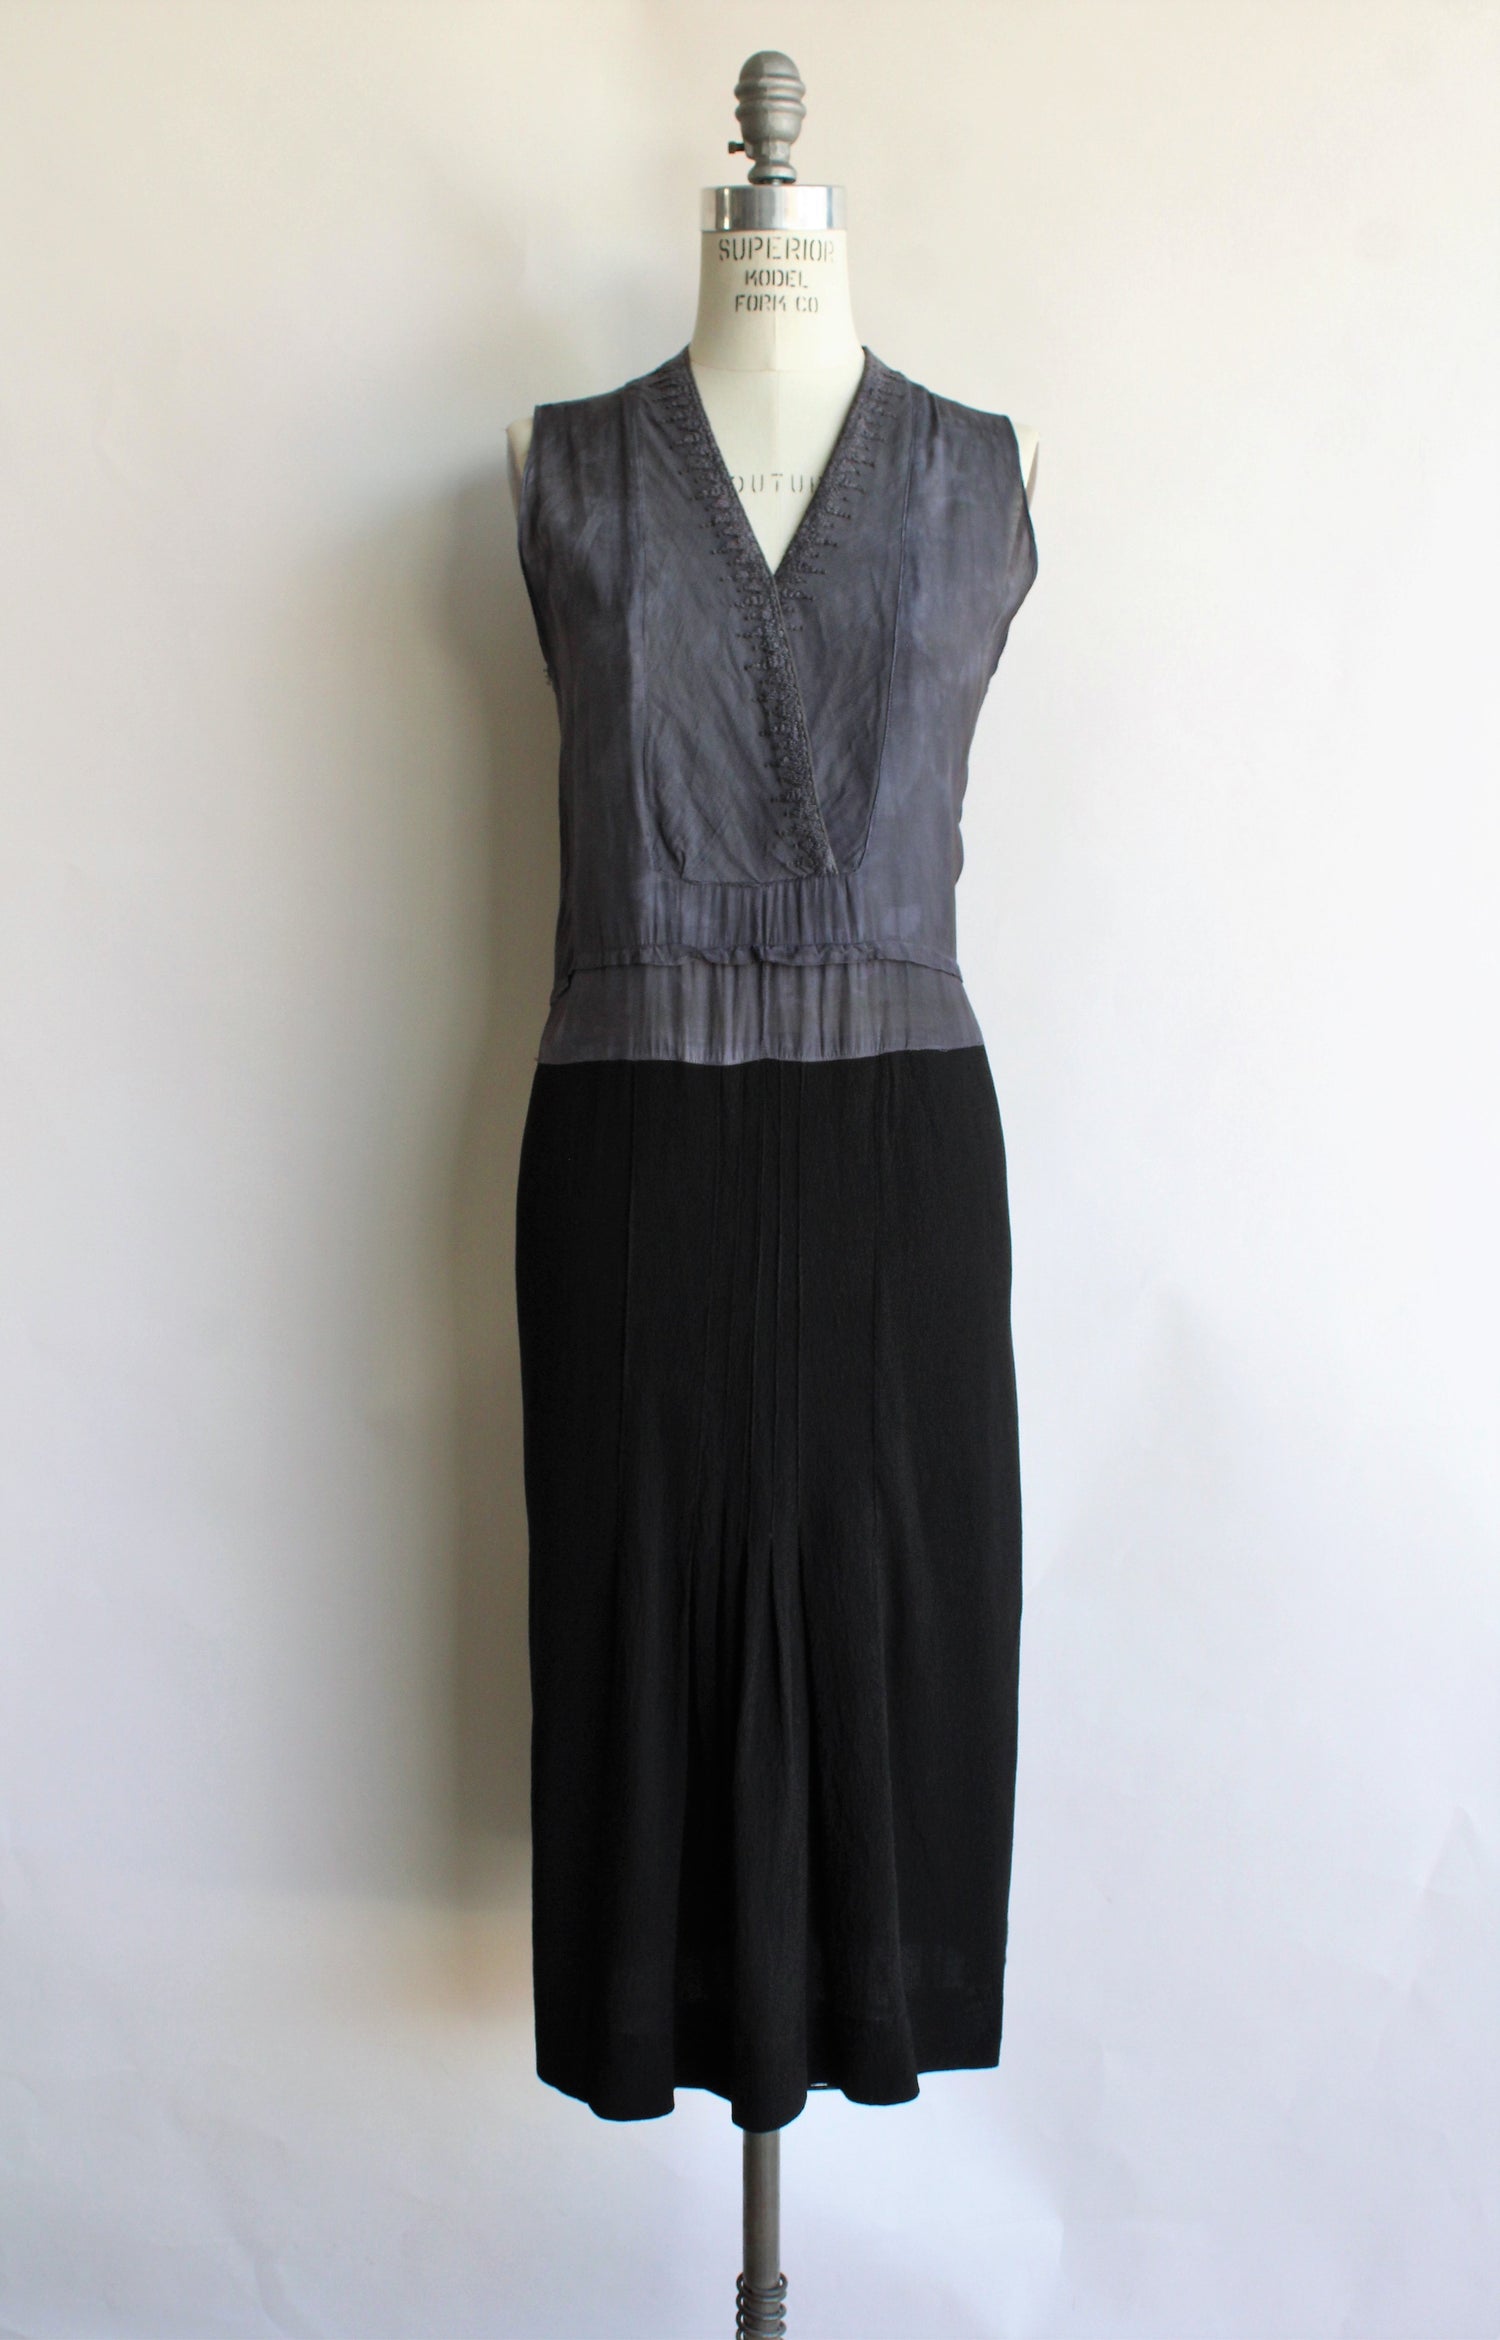 Vintage 1940s Black Rayon Dress with Criss Cross Bodice